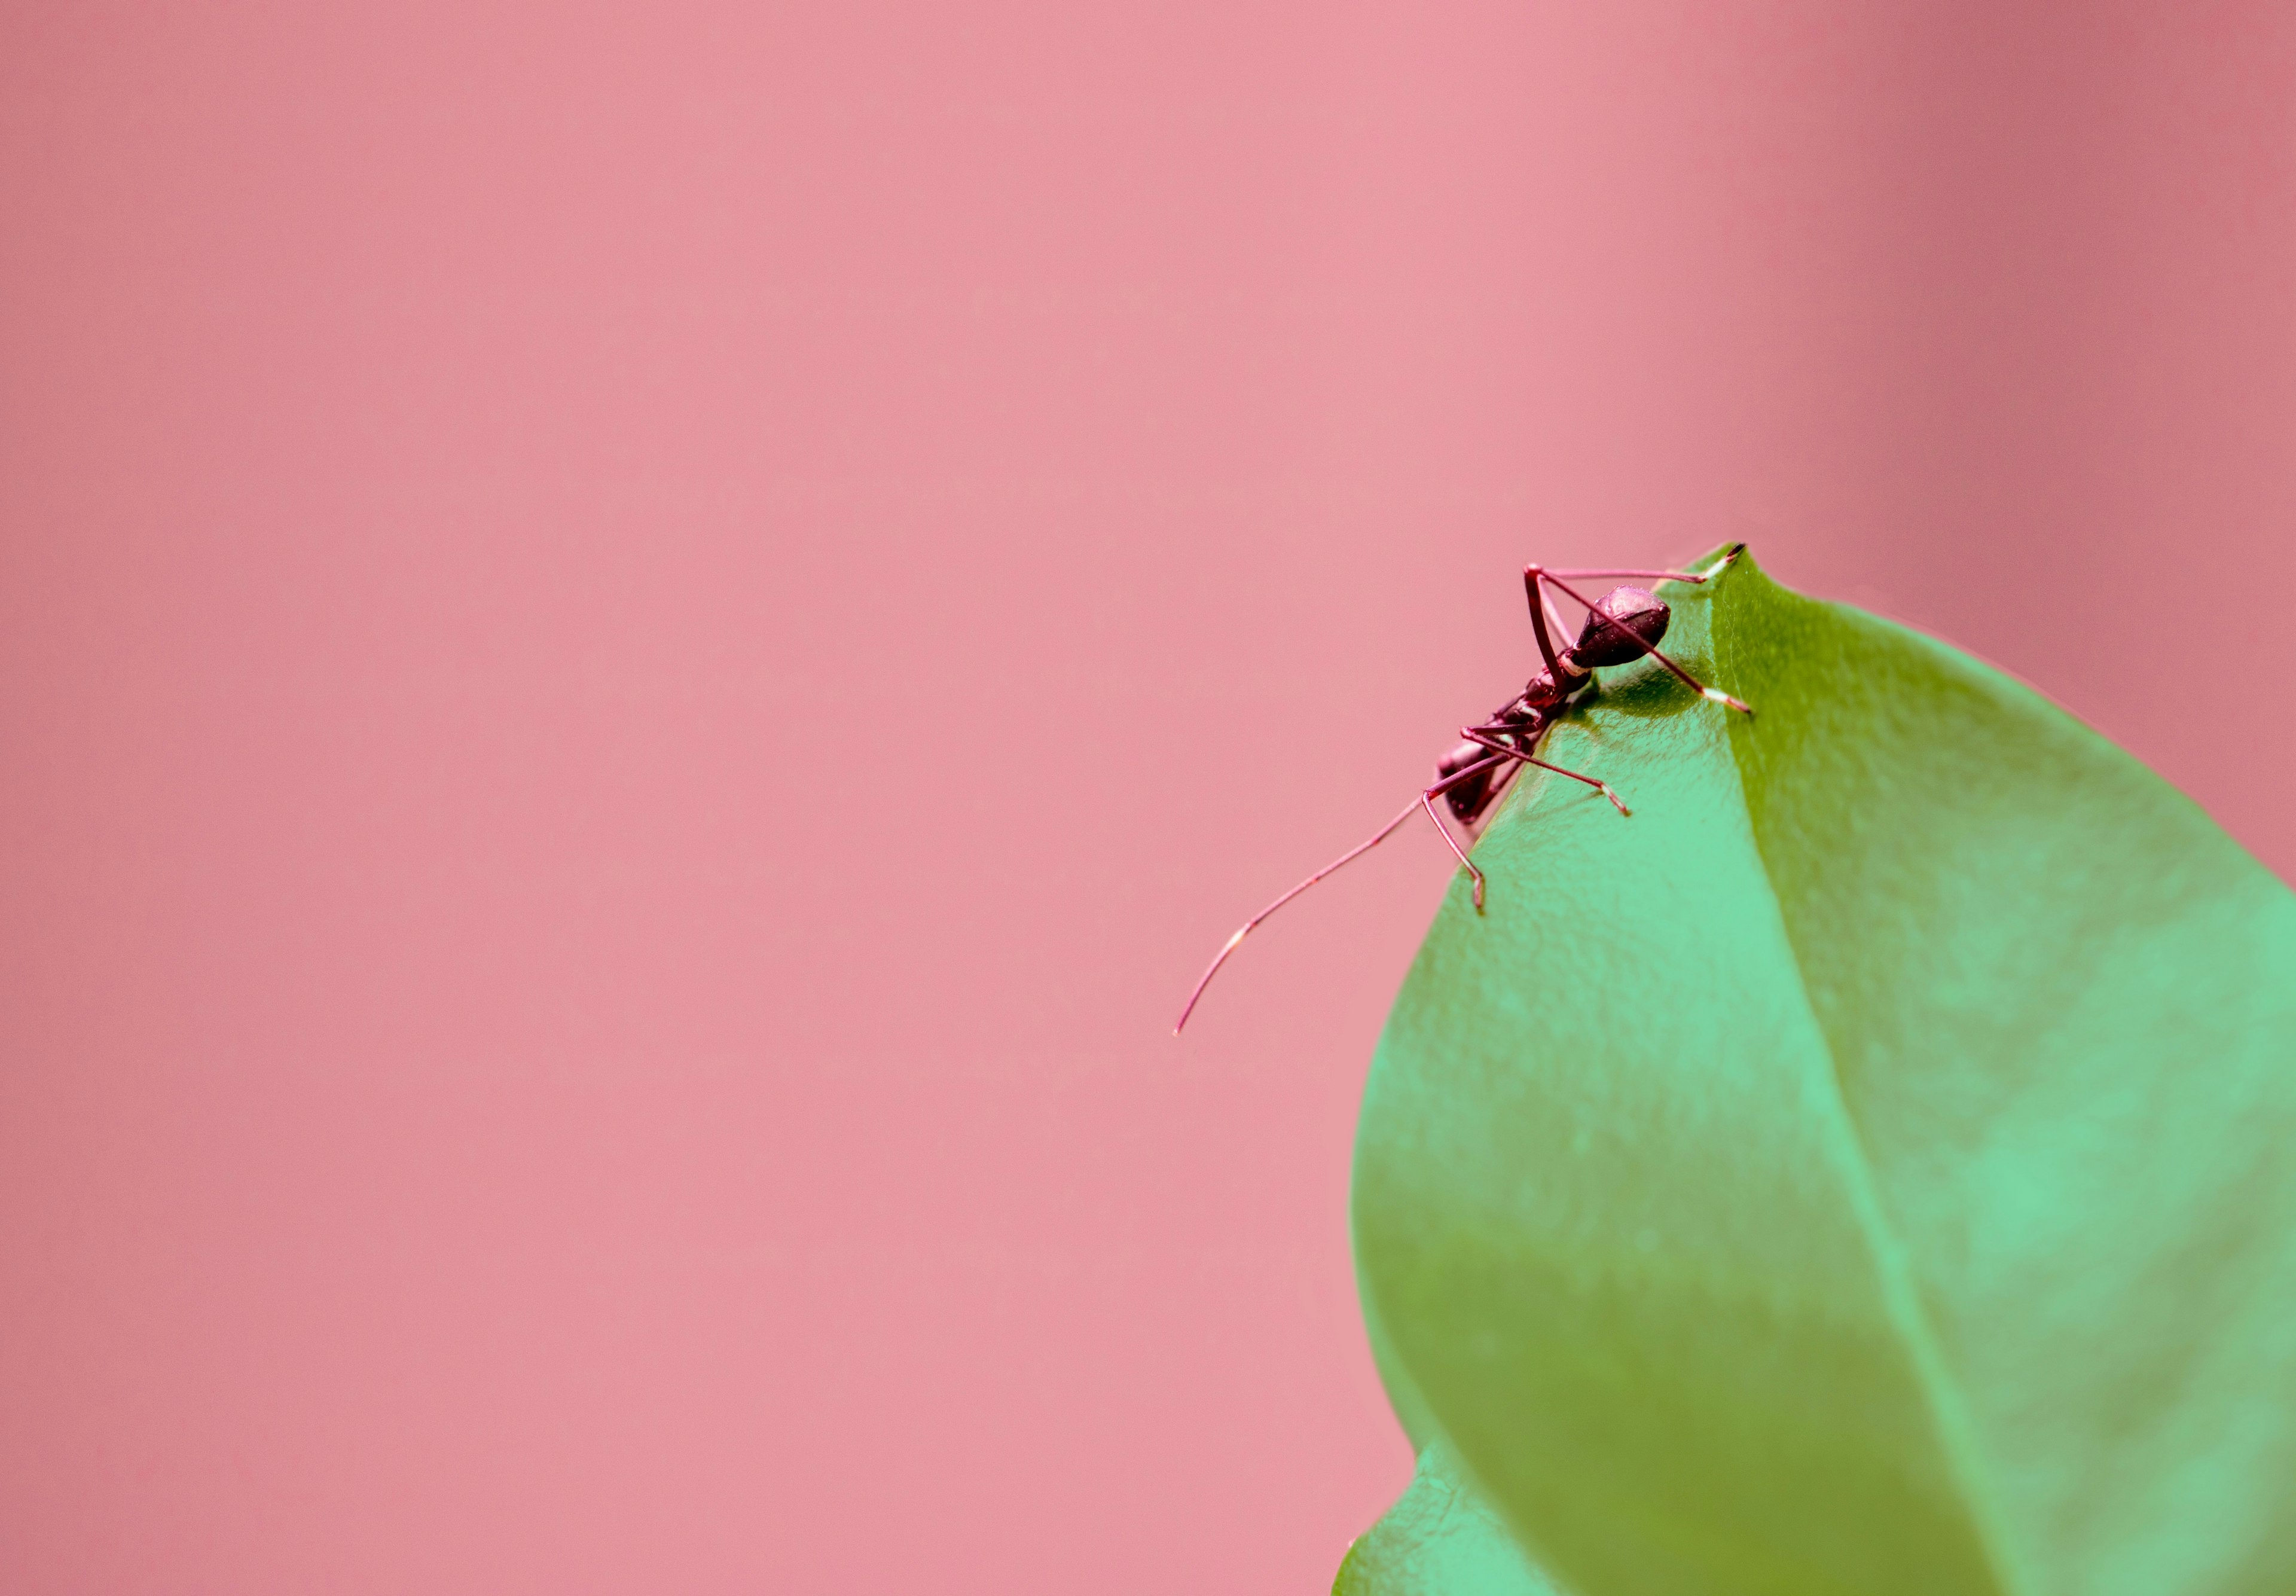 a small ant on a green leaf in front of pink background